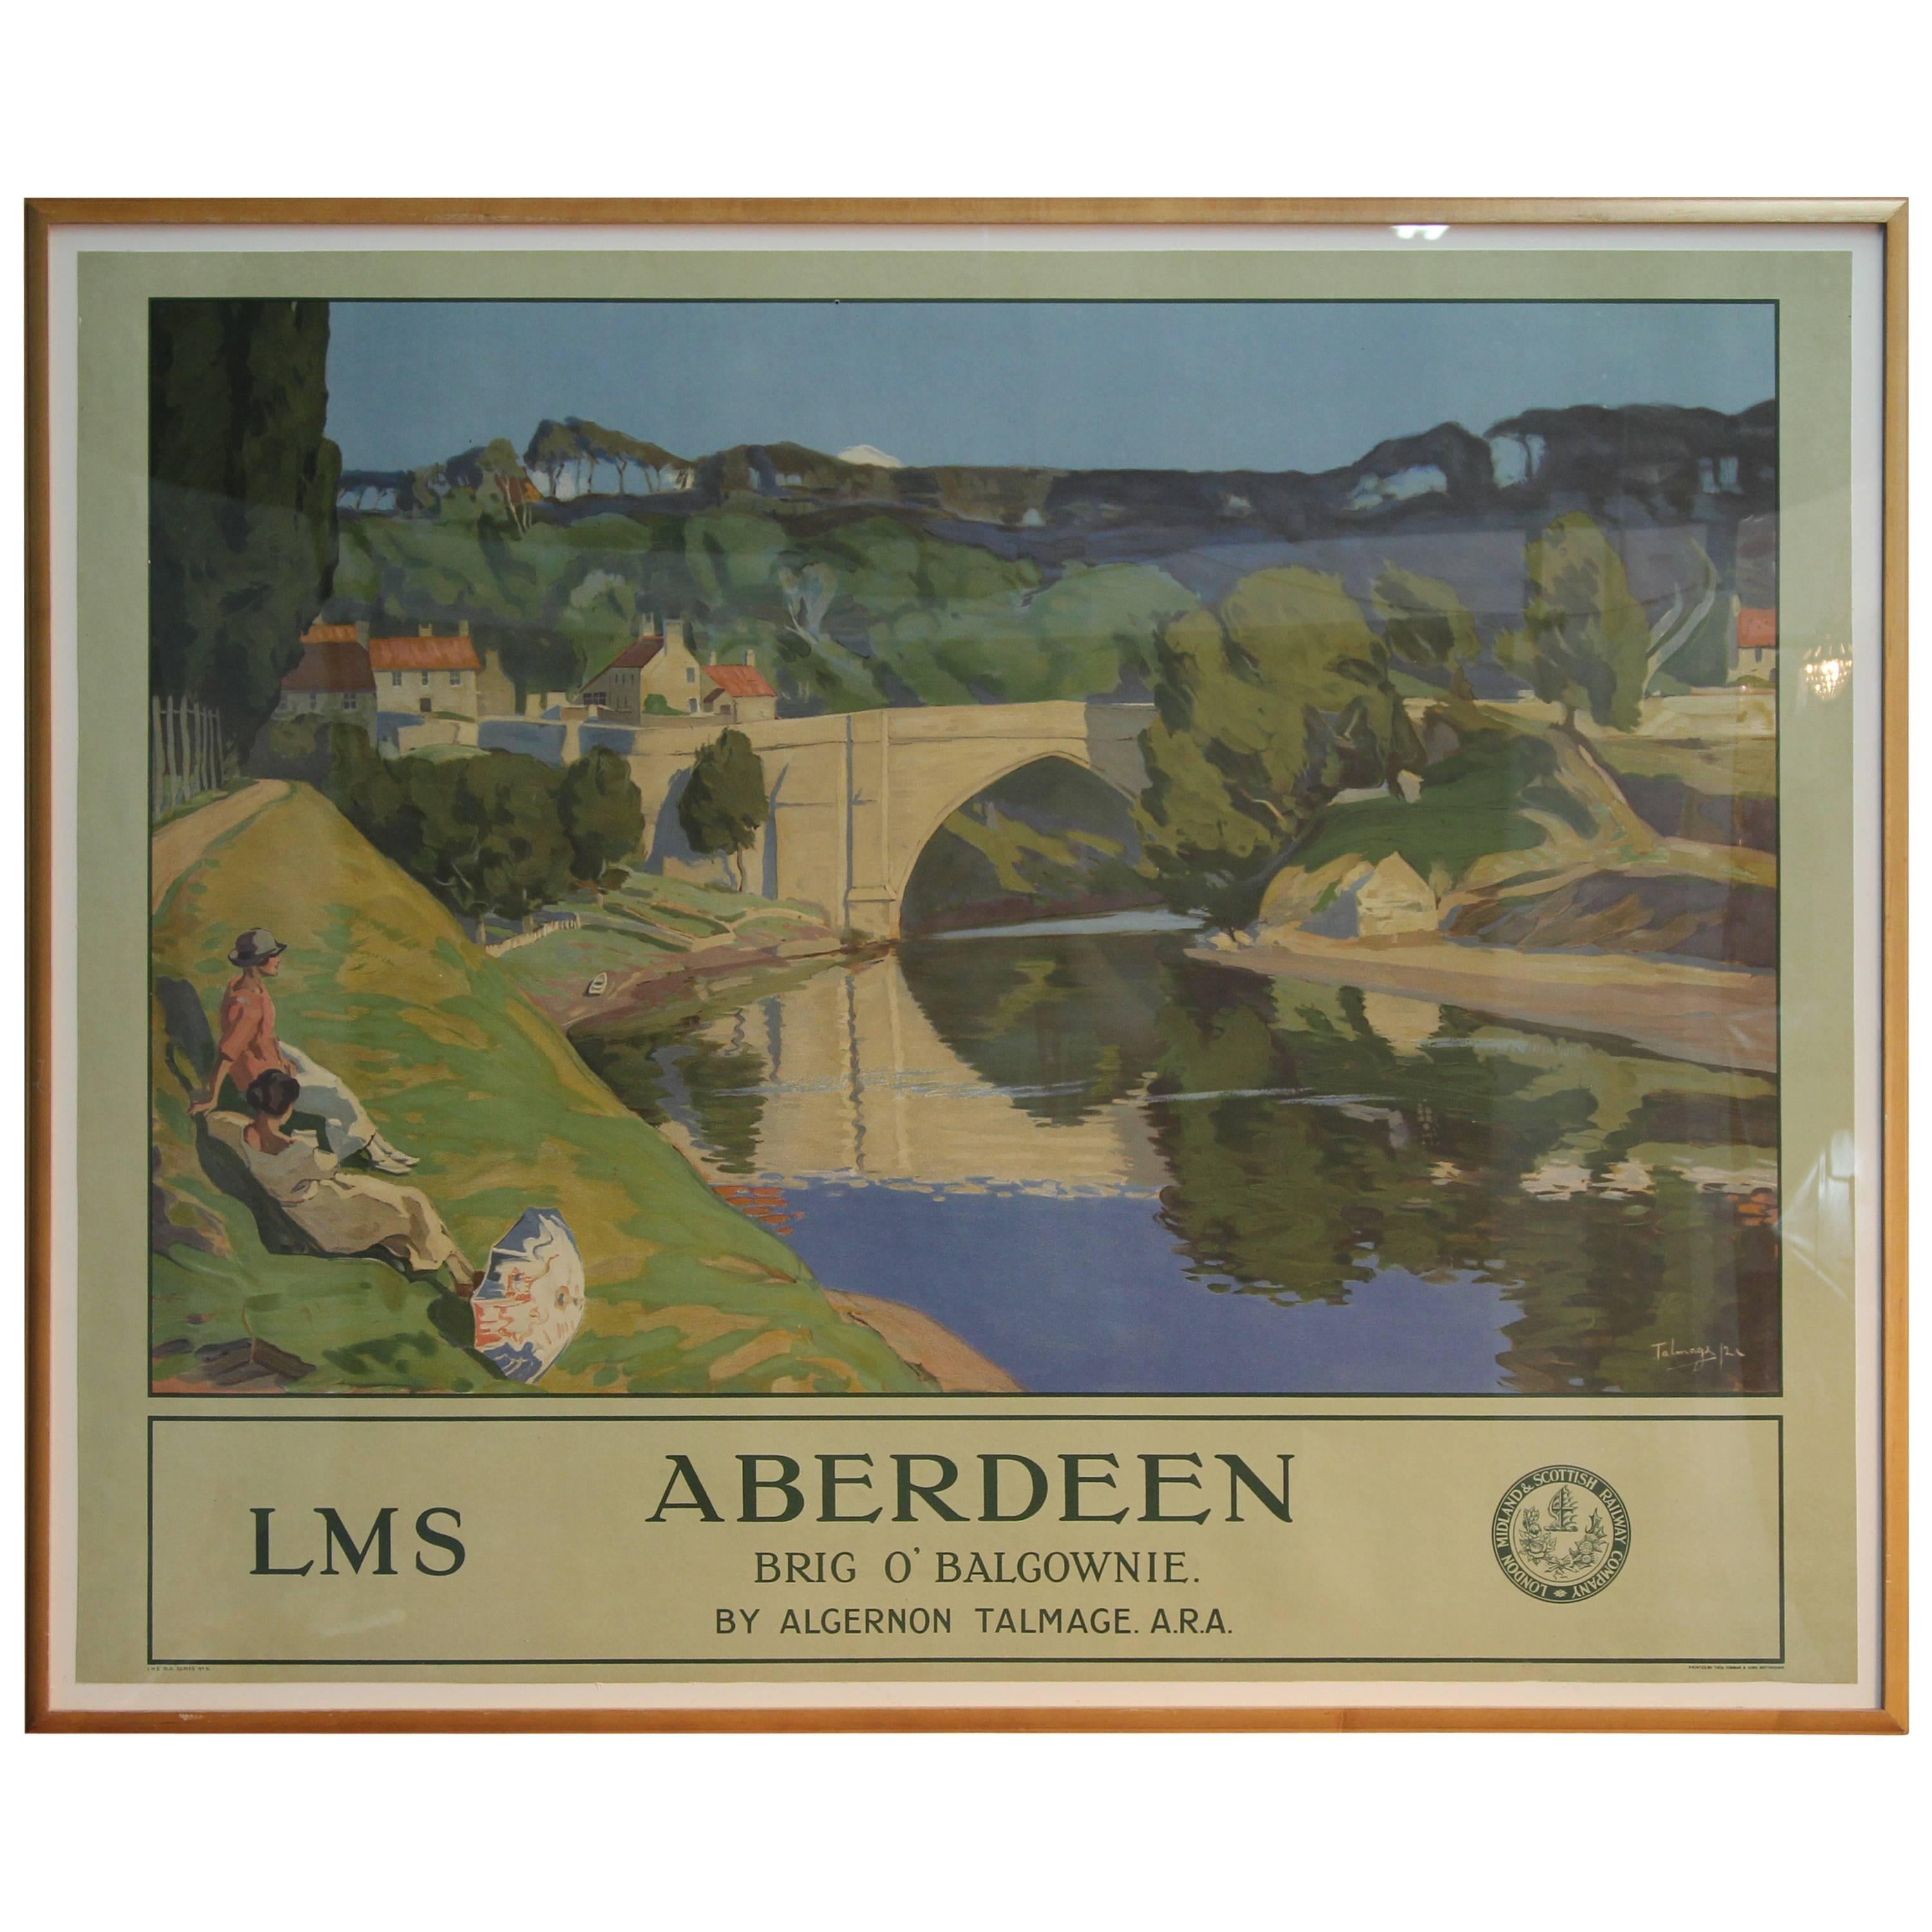 Vintage Travel Poster "Brig O'Balgownie, LMS" For Sale